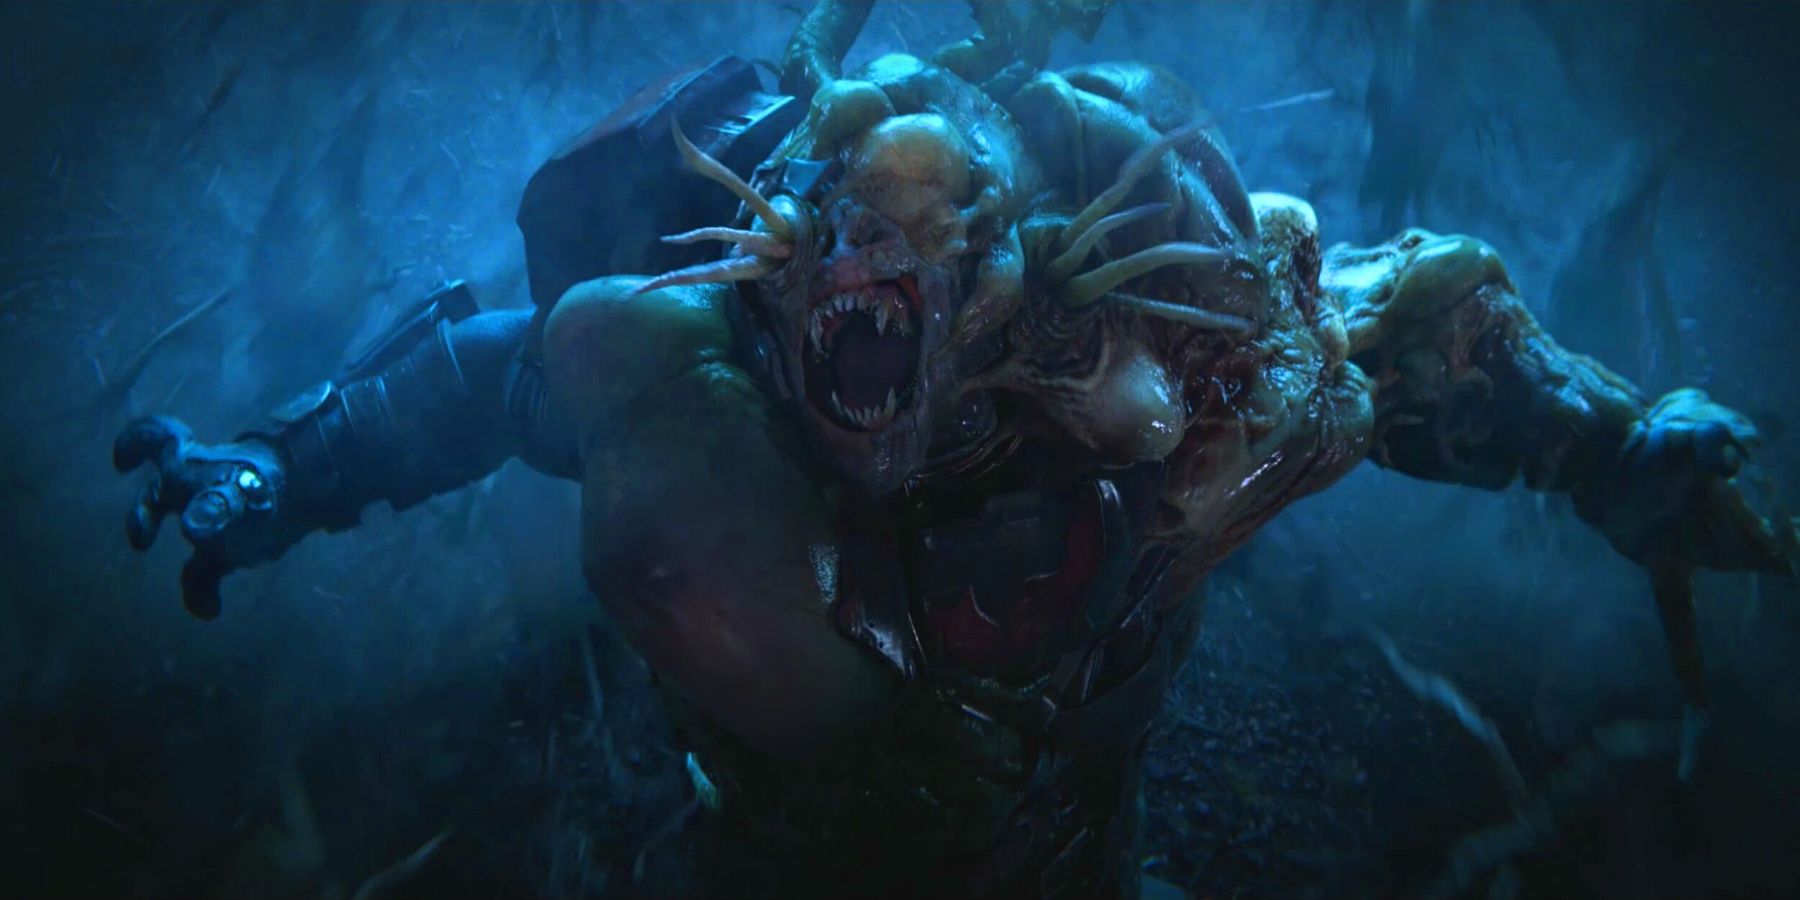 halo flood infected brute from halo wars 2 dlc campaign